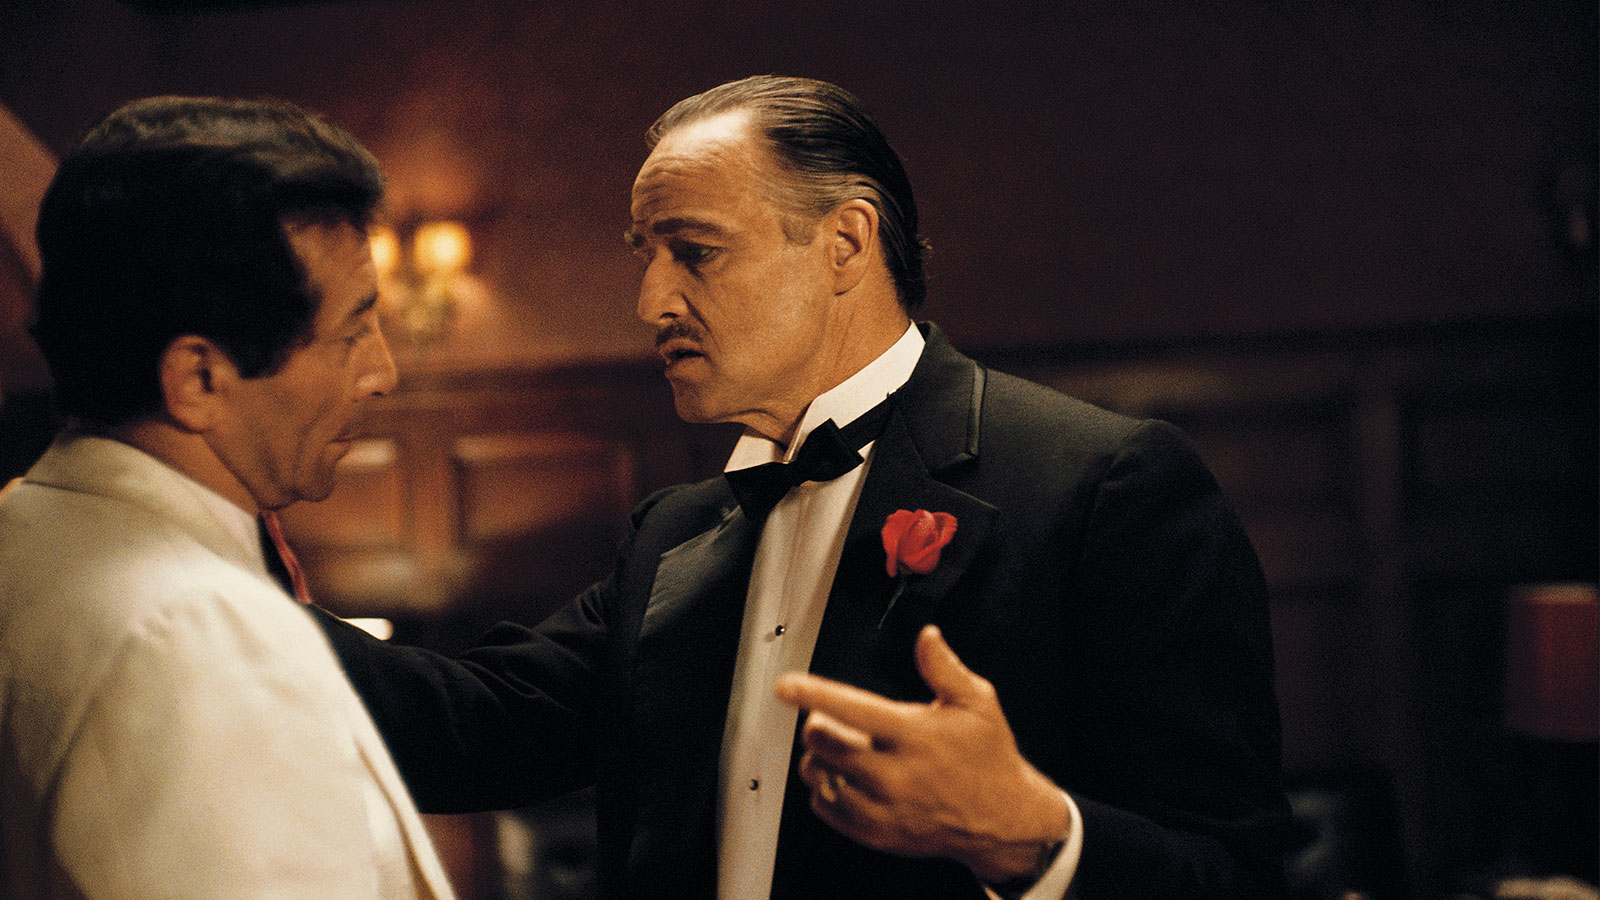 Fashion: How The Godfather Keeps Giving Us Great Italian American Style |  The Journal | MR PORTER